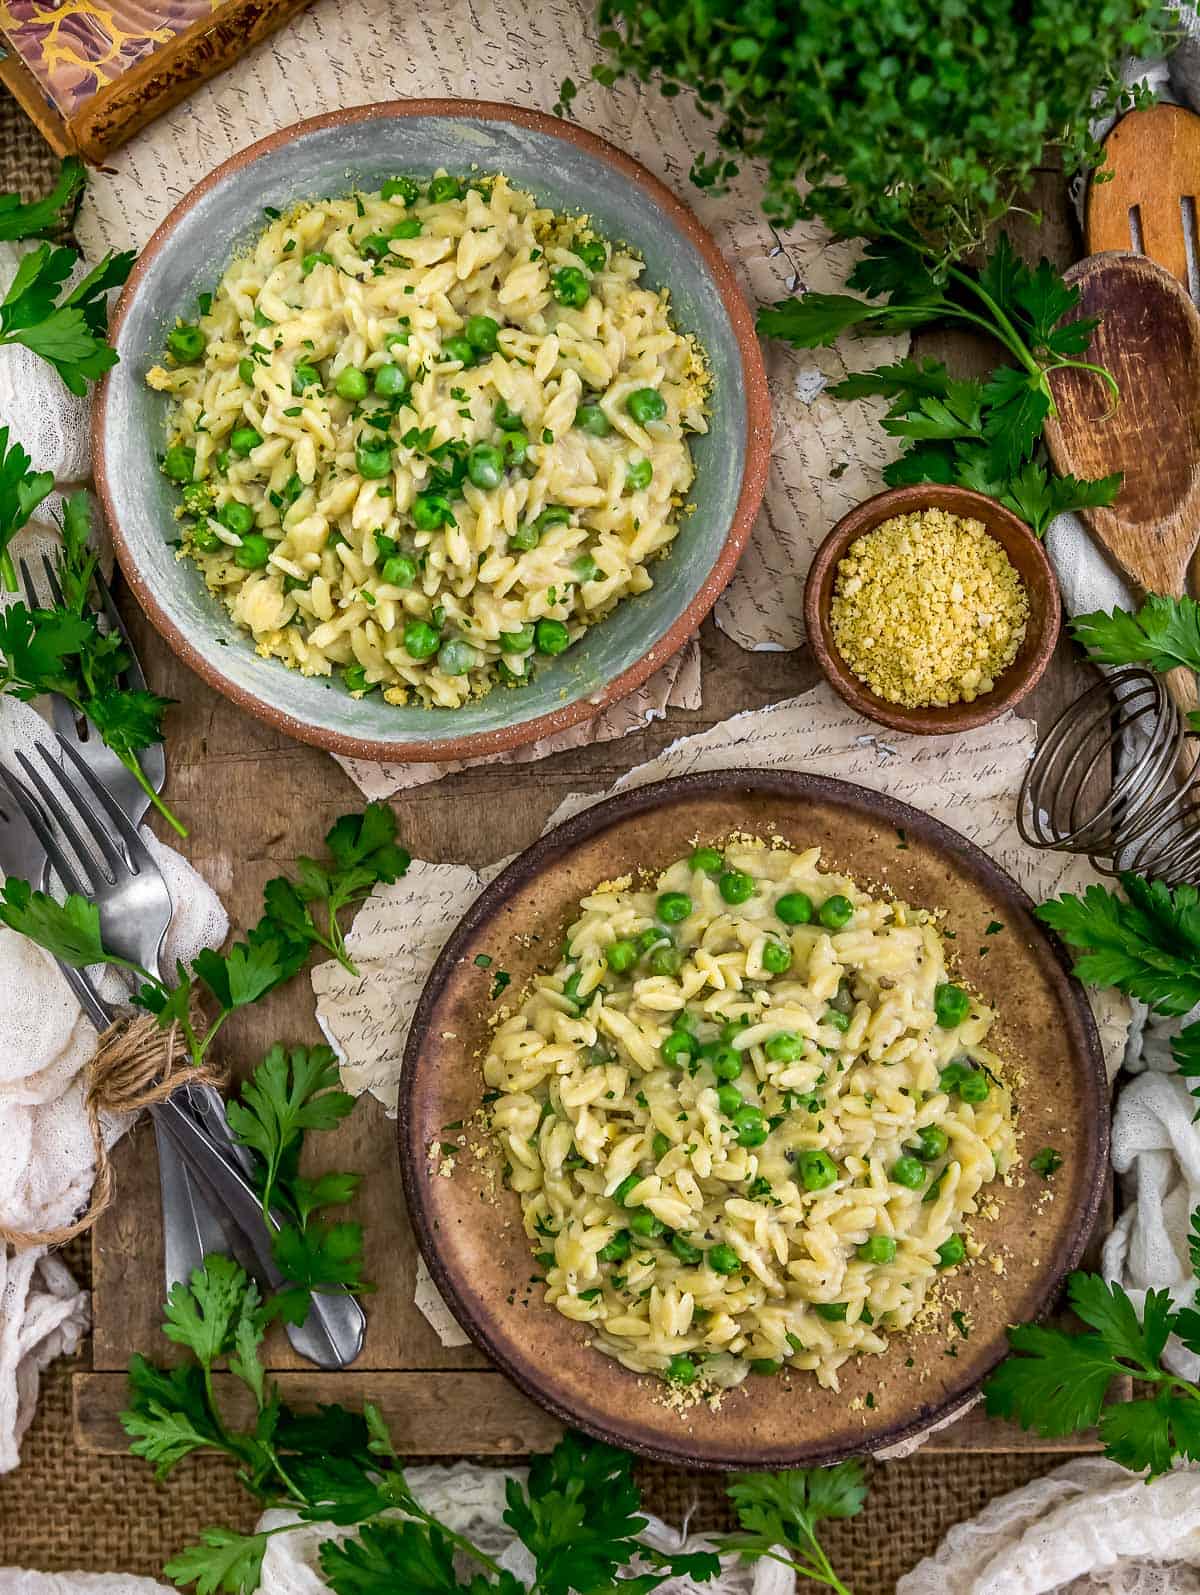 Tablescape of Vegan Creamy Parmesan Orzo and Peas